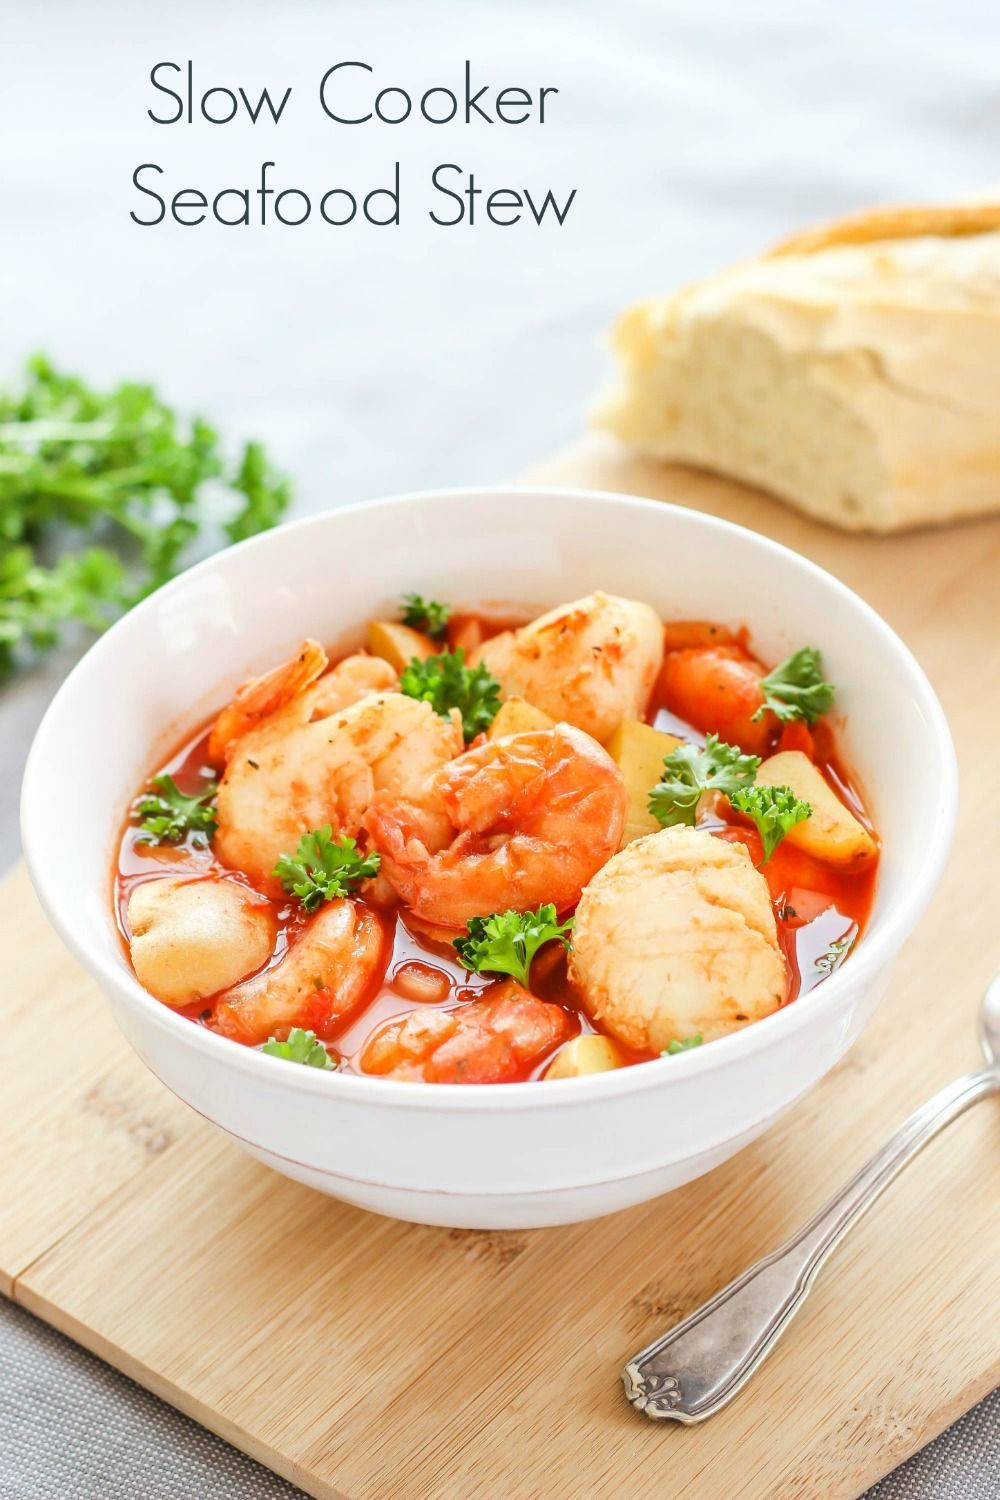 Tomato Based Seafood Stew
 Slow Cooker Seafood Stew a delicious seafood recipe